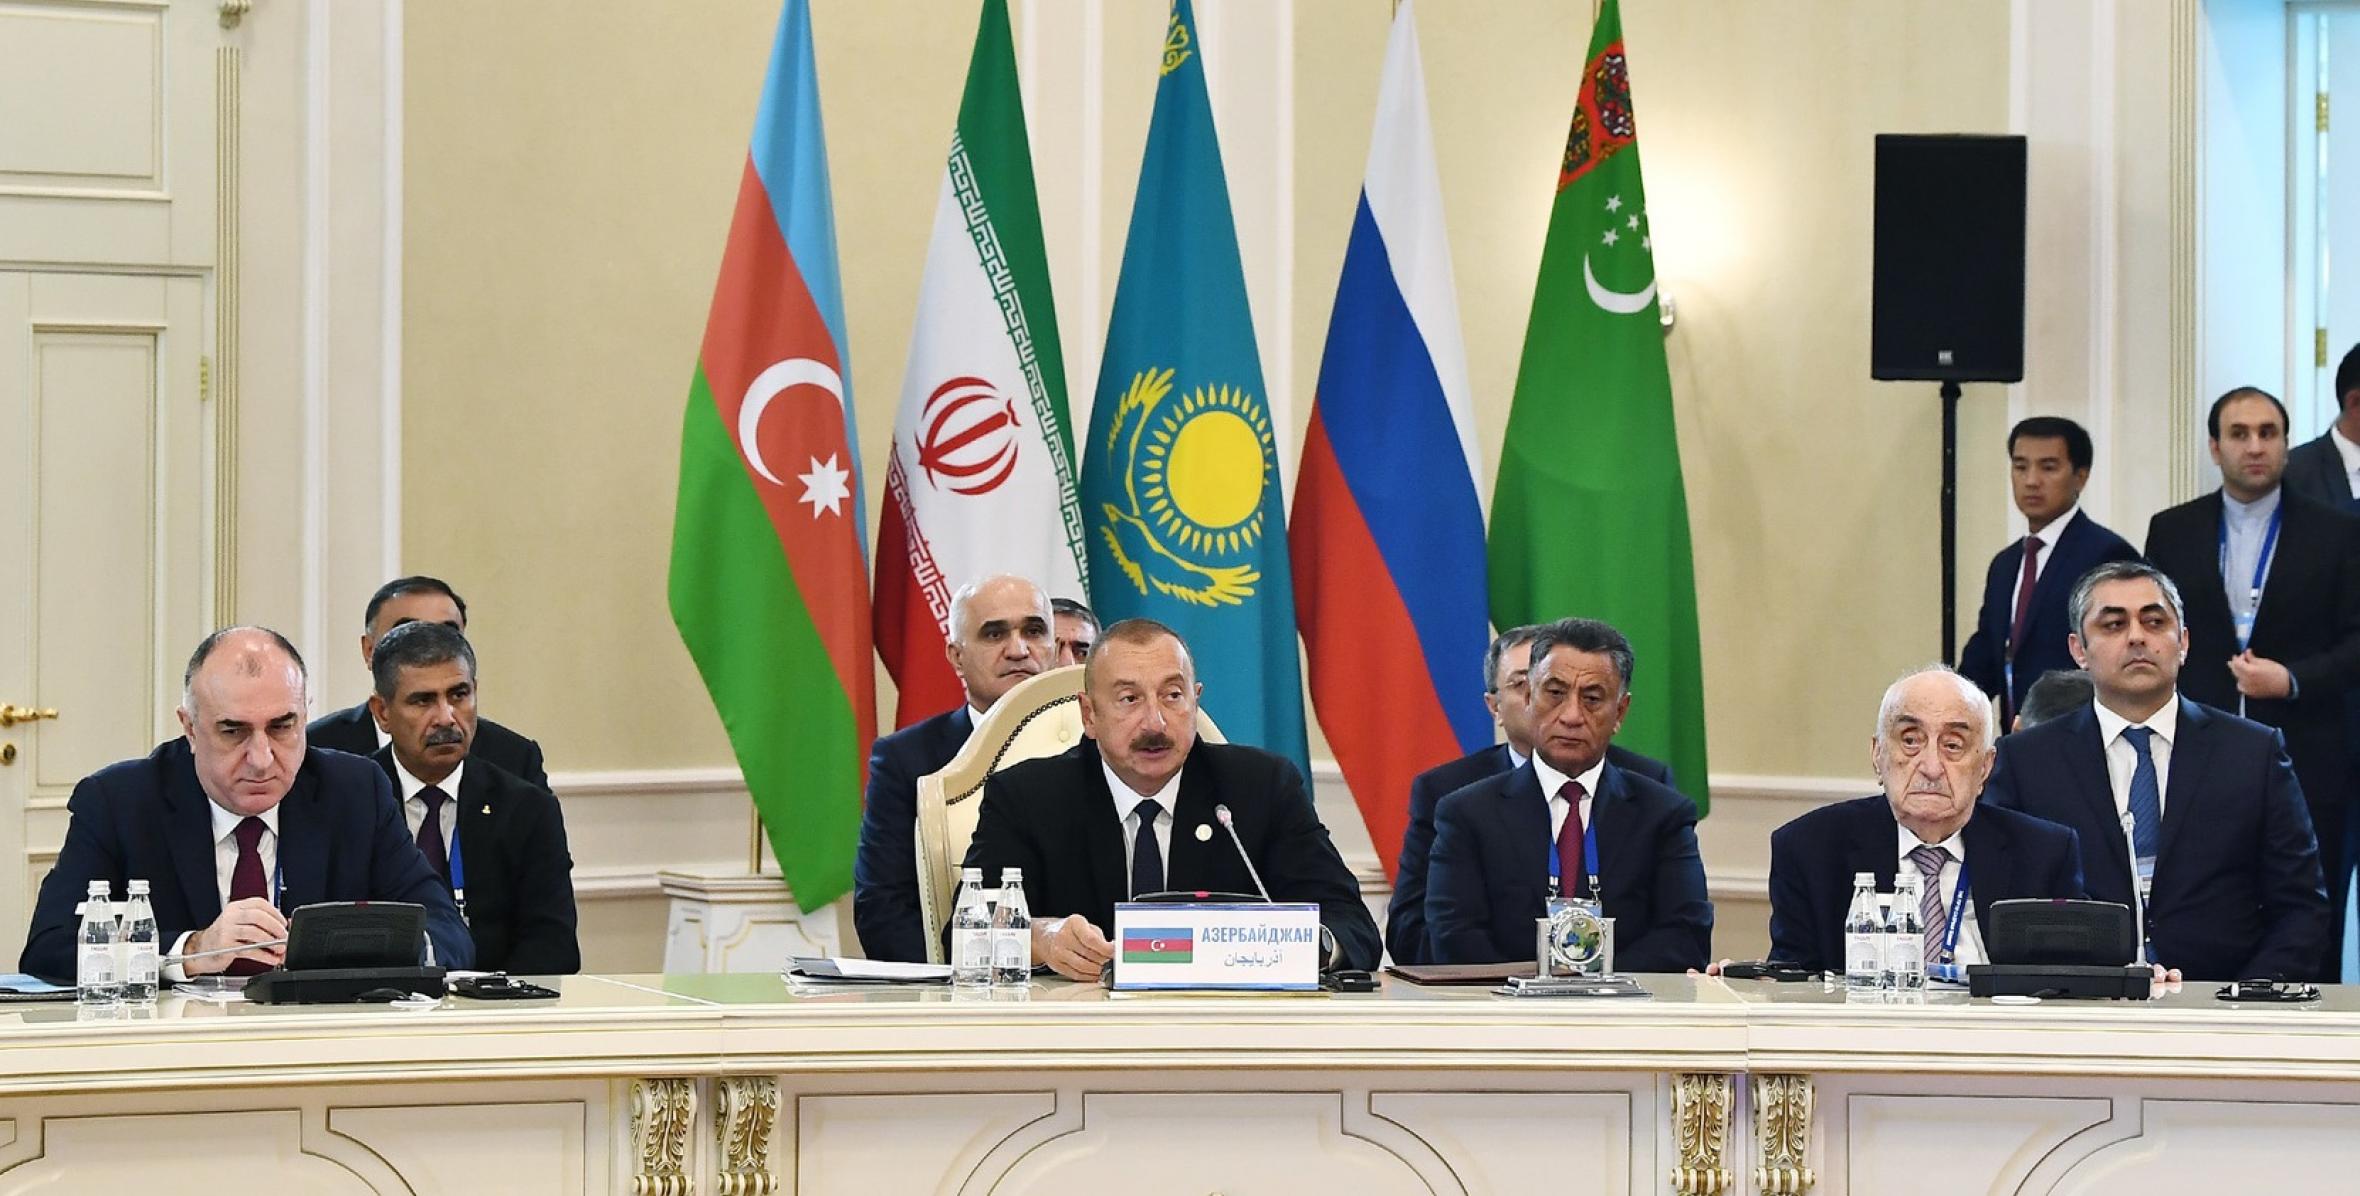 Speech by Ilham Aliyev at the 5th Summit of Heads of State of Caspian littoral states